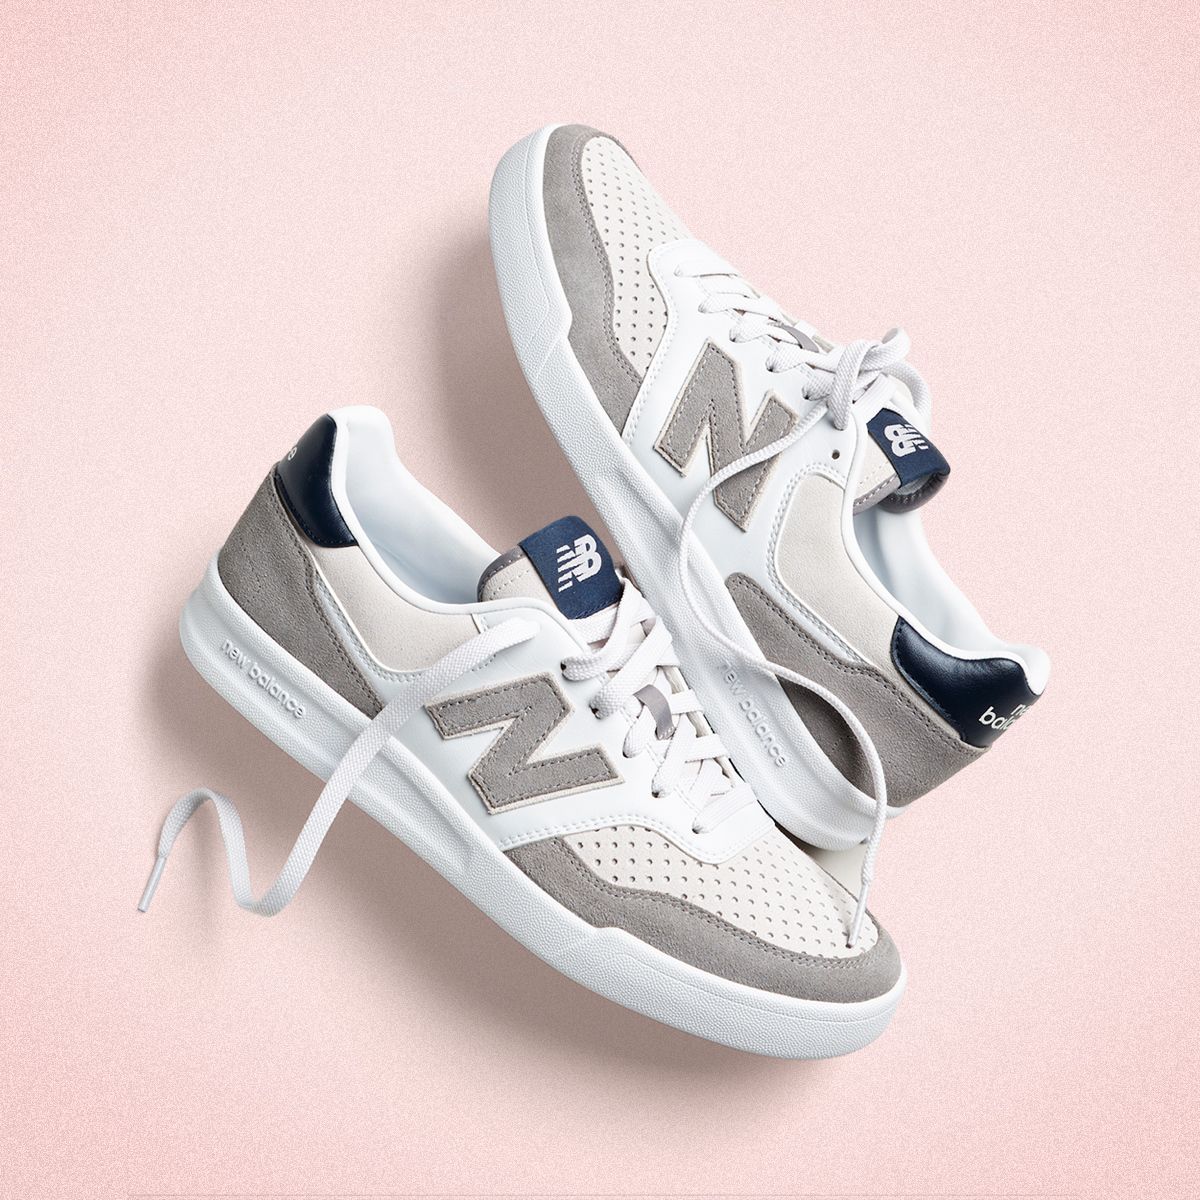 Huh Christendom Commotie New Balance x J.Crew CRT300 V2 Sneakers Release, Price, and Where to Buy